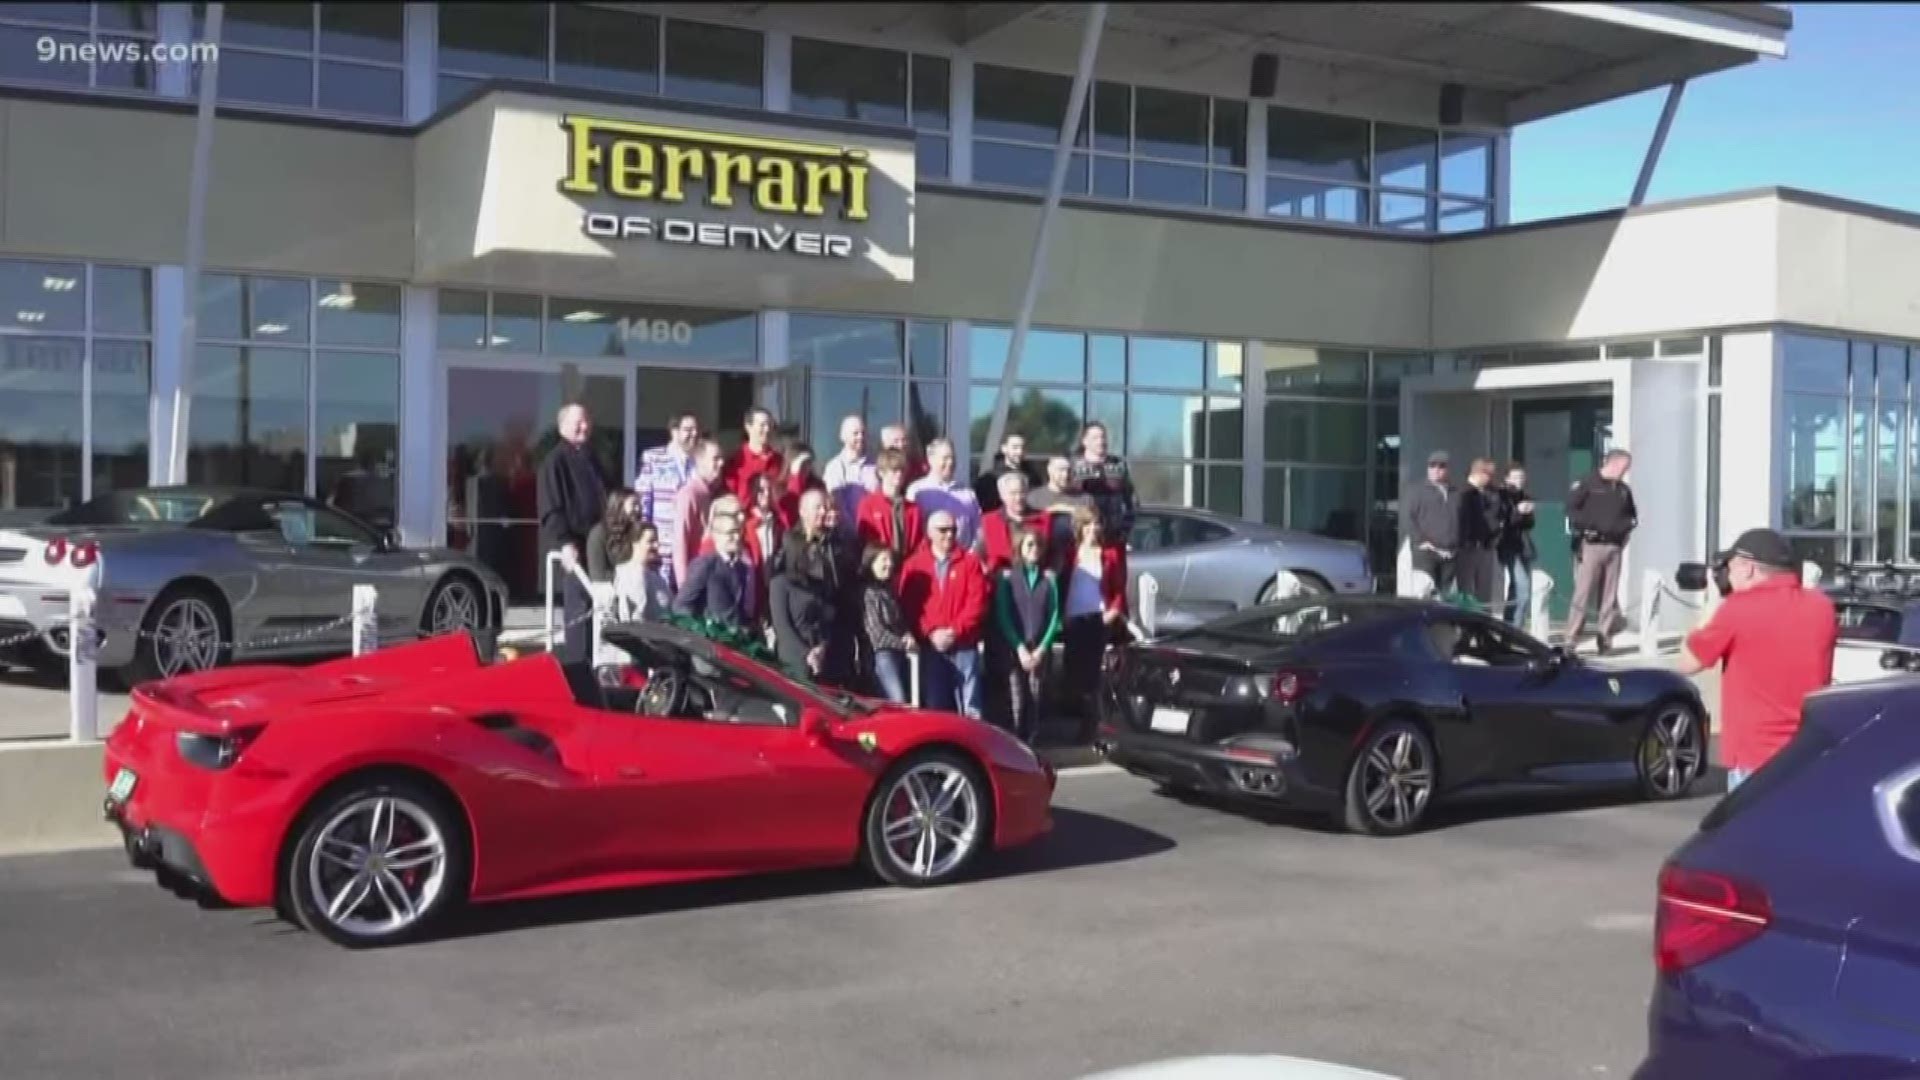 Ferrari of Denver is getting ready for their 11th annual toy drive and they could use your help.